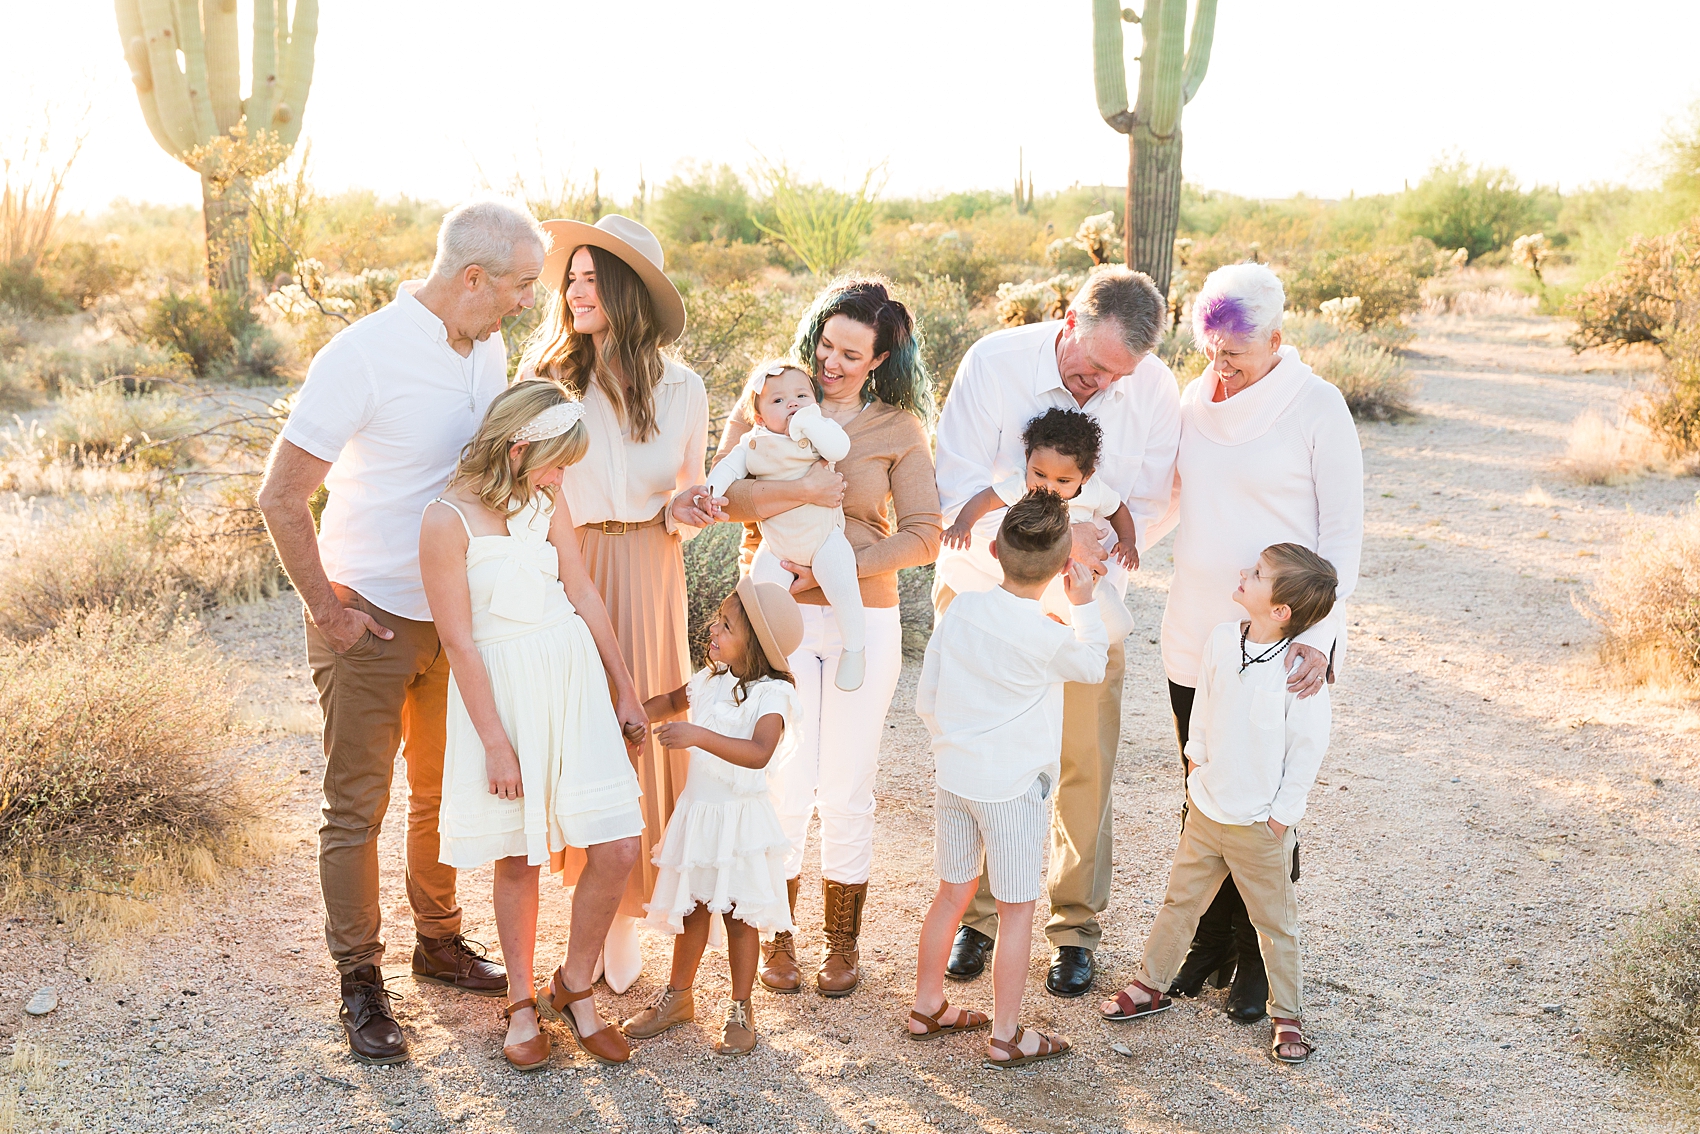 Leah Hope Photography | Downtown Phoenix Arizona | Desert Landscape Cactus Scenery | Family Pictures | What to Wear | Earth Tones and Neutrals | Golden Hour Sunset Sunlight | Family Poses